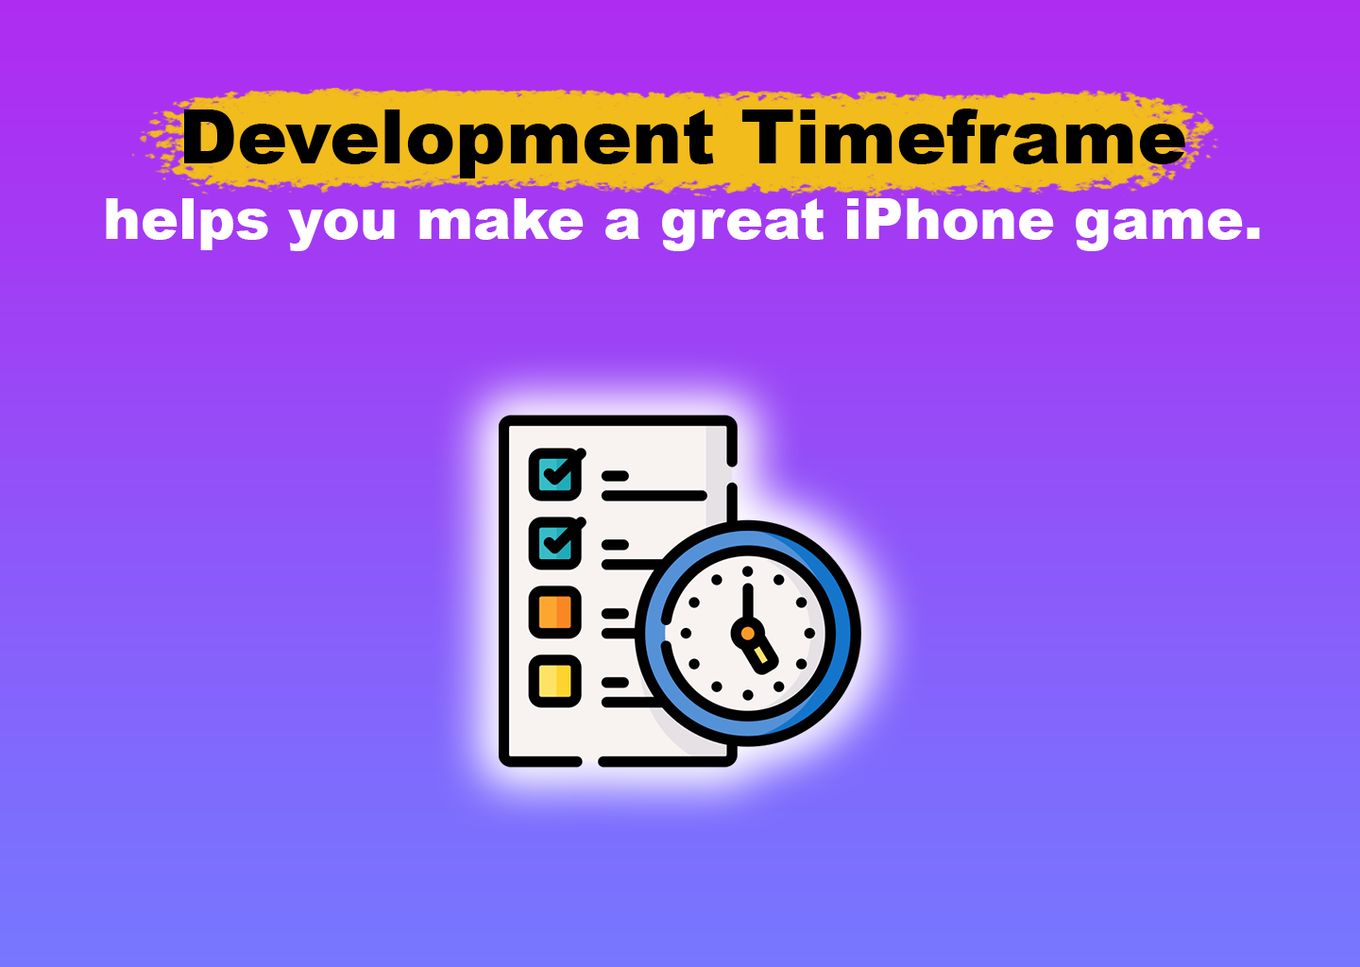 Development Timeframe helps you make a great iPhone game